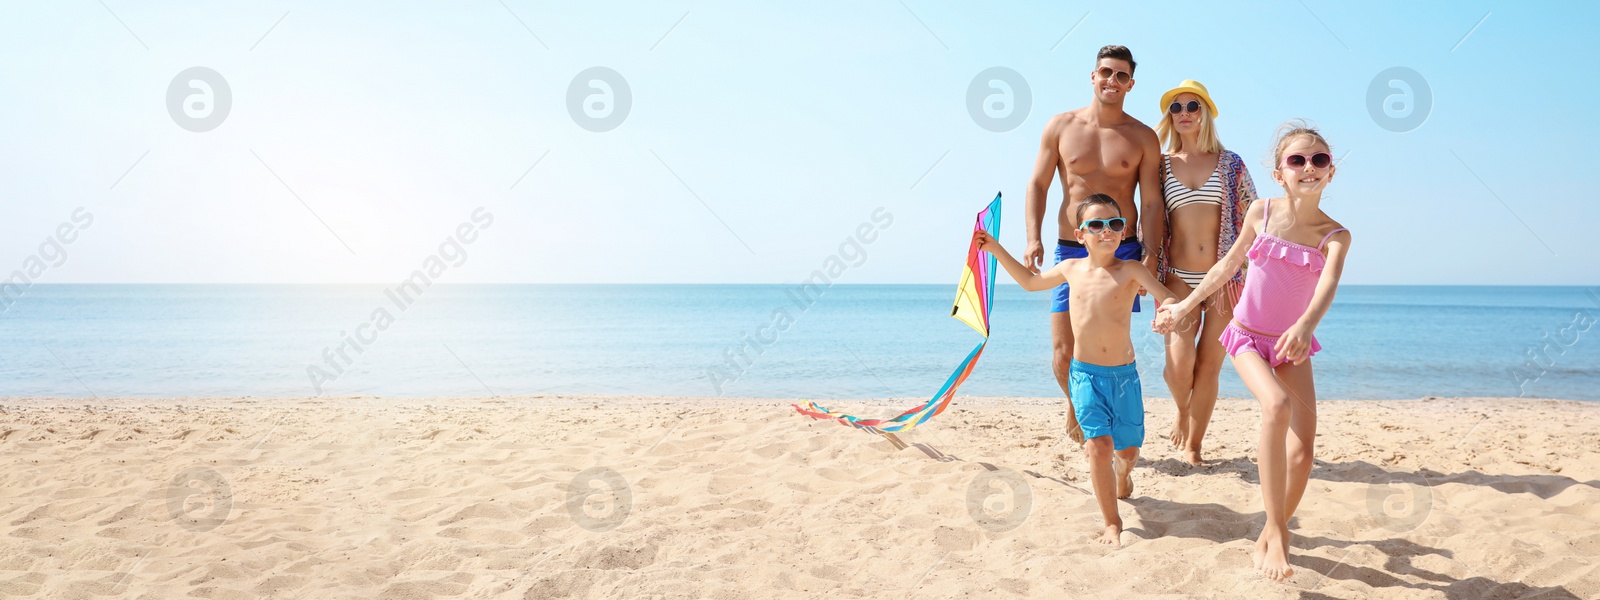 Image of Happy family with kite at beach on sunny day, space for text. Banner design